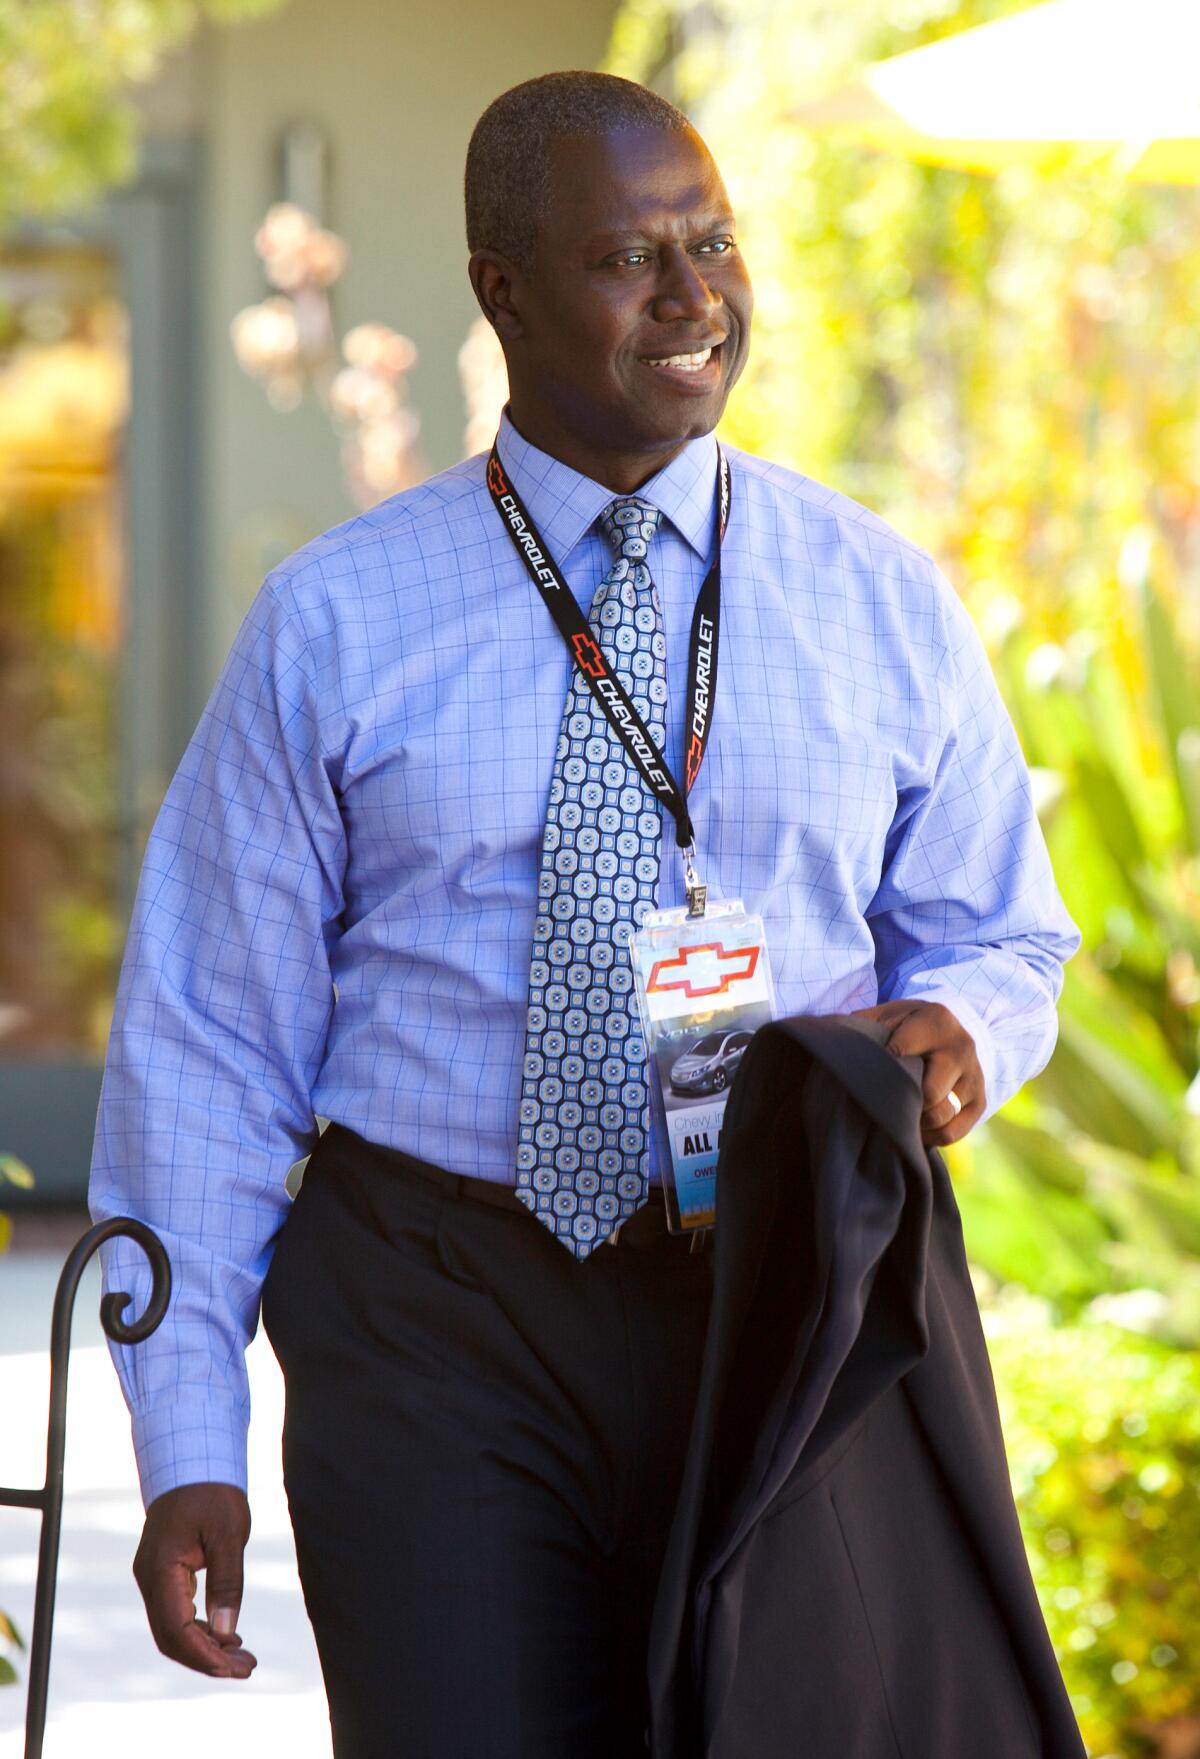 Andre Braugher as Owen walking outside in a shirt and tie with a lanyard around his neck.